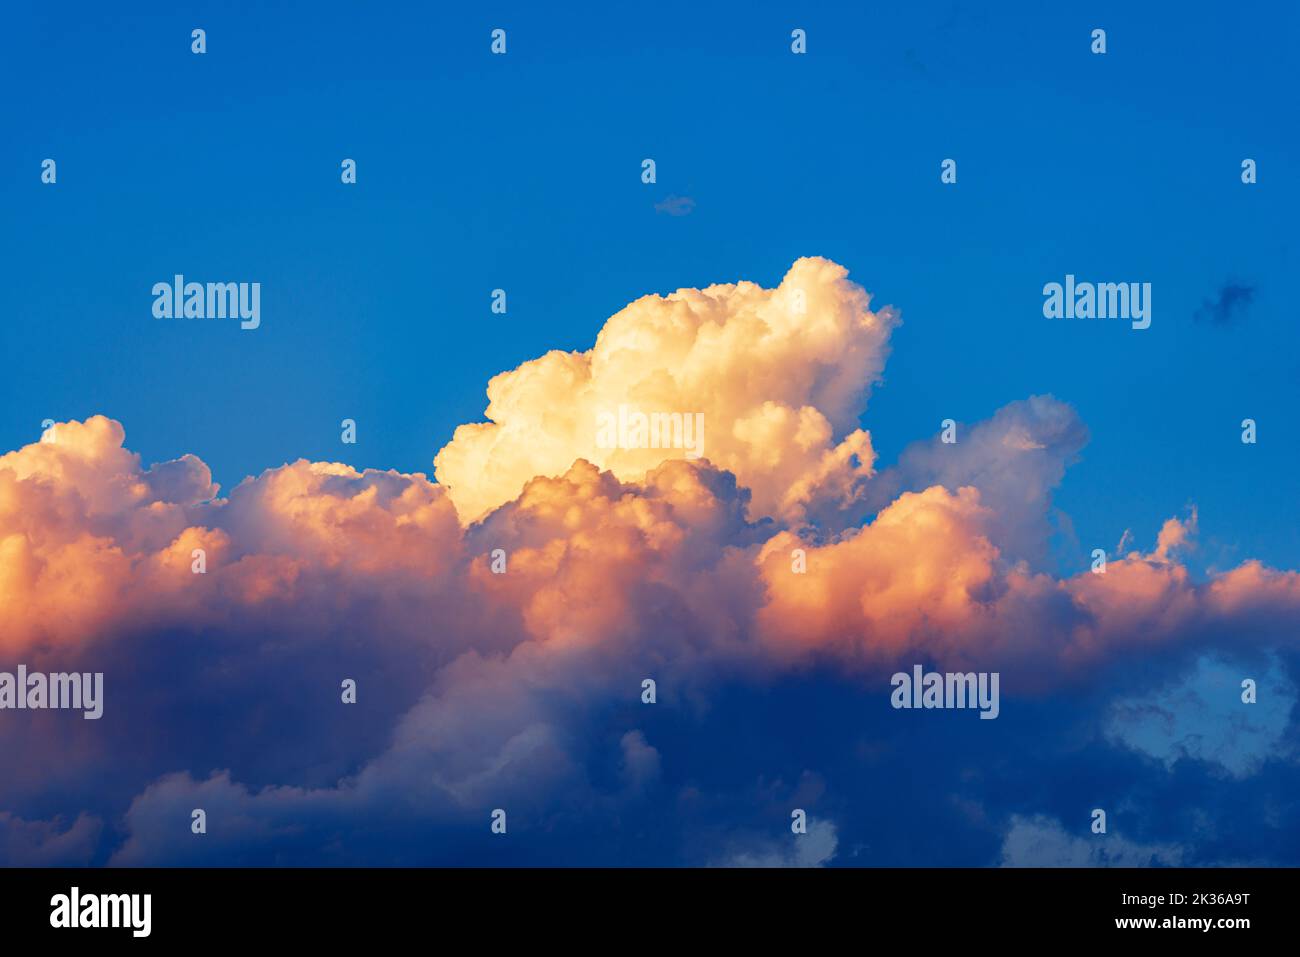 Photography of beautiful storm clouds, cumulus clouds or cumulonimbus at sunset. Full frame, sky only. Stock Photo